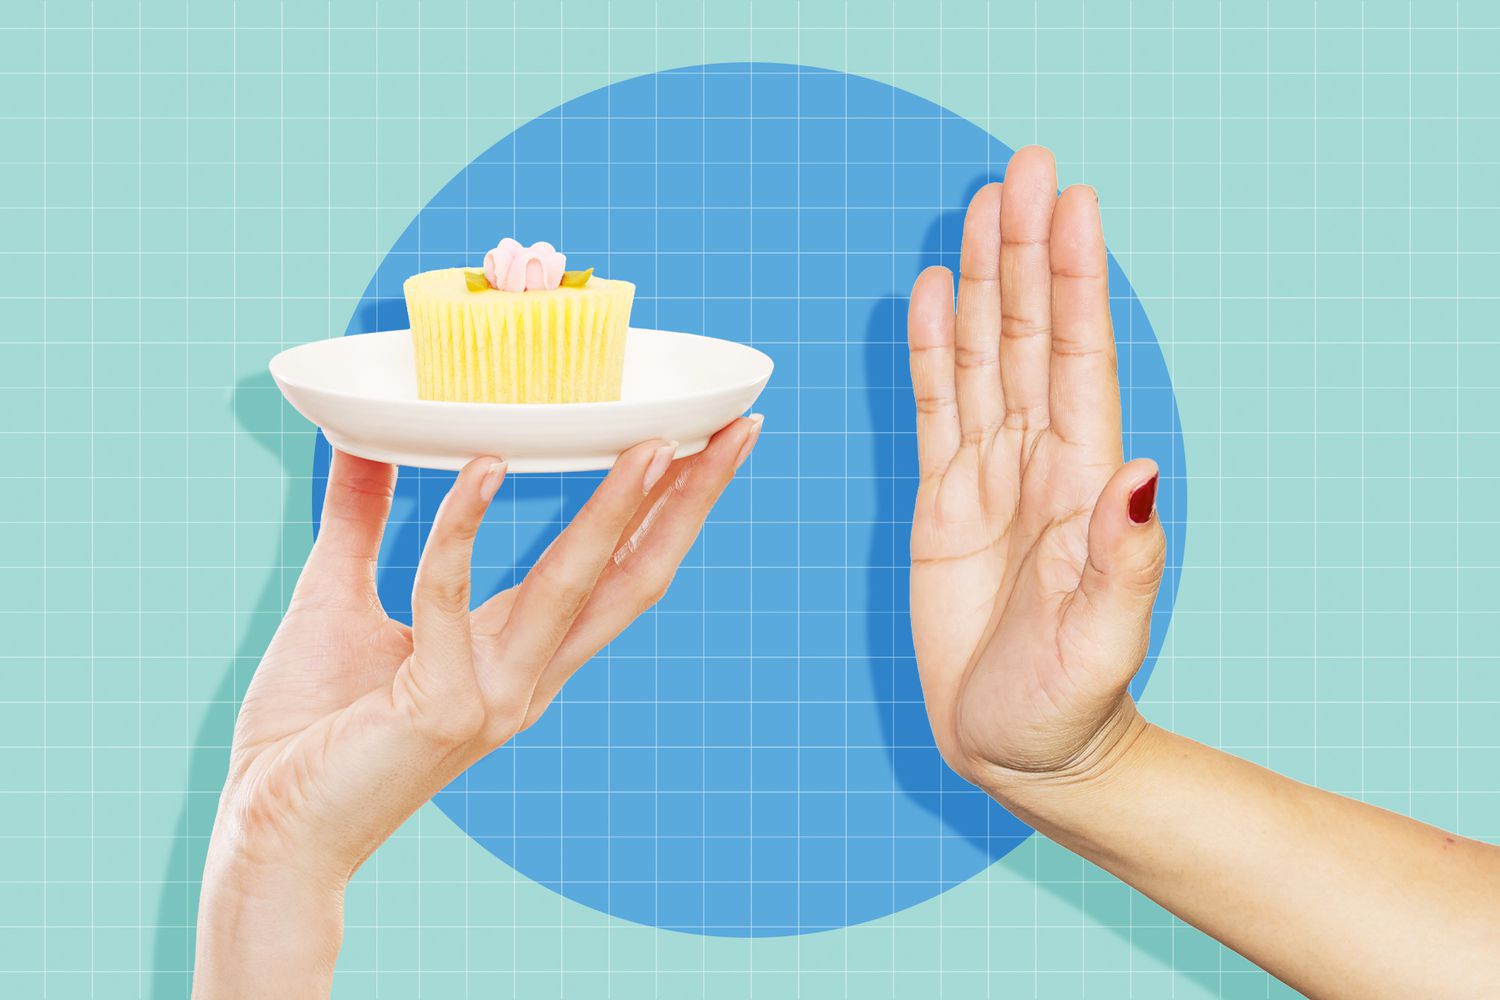 a hand holding a plate with a cup cake with another hand refusing it